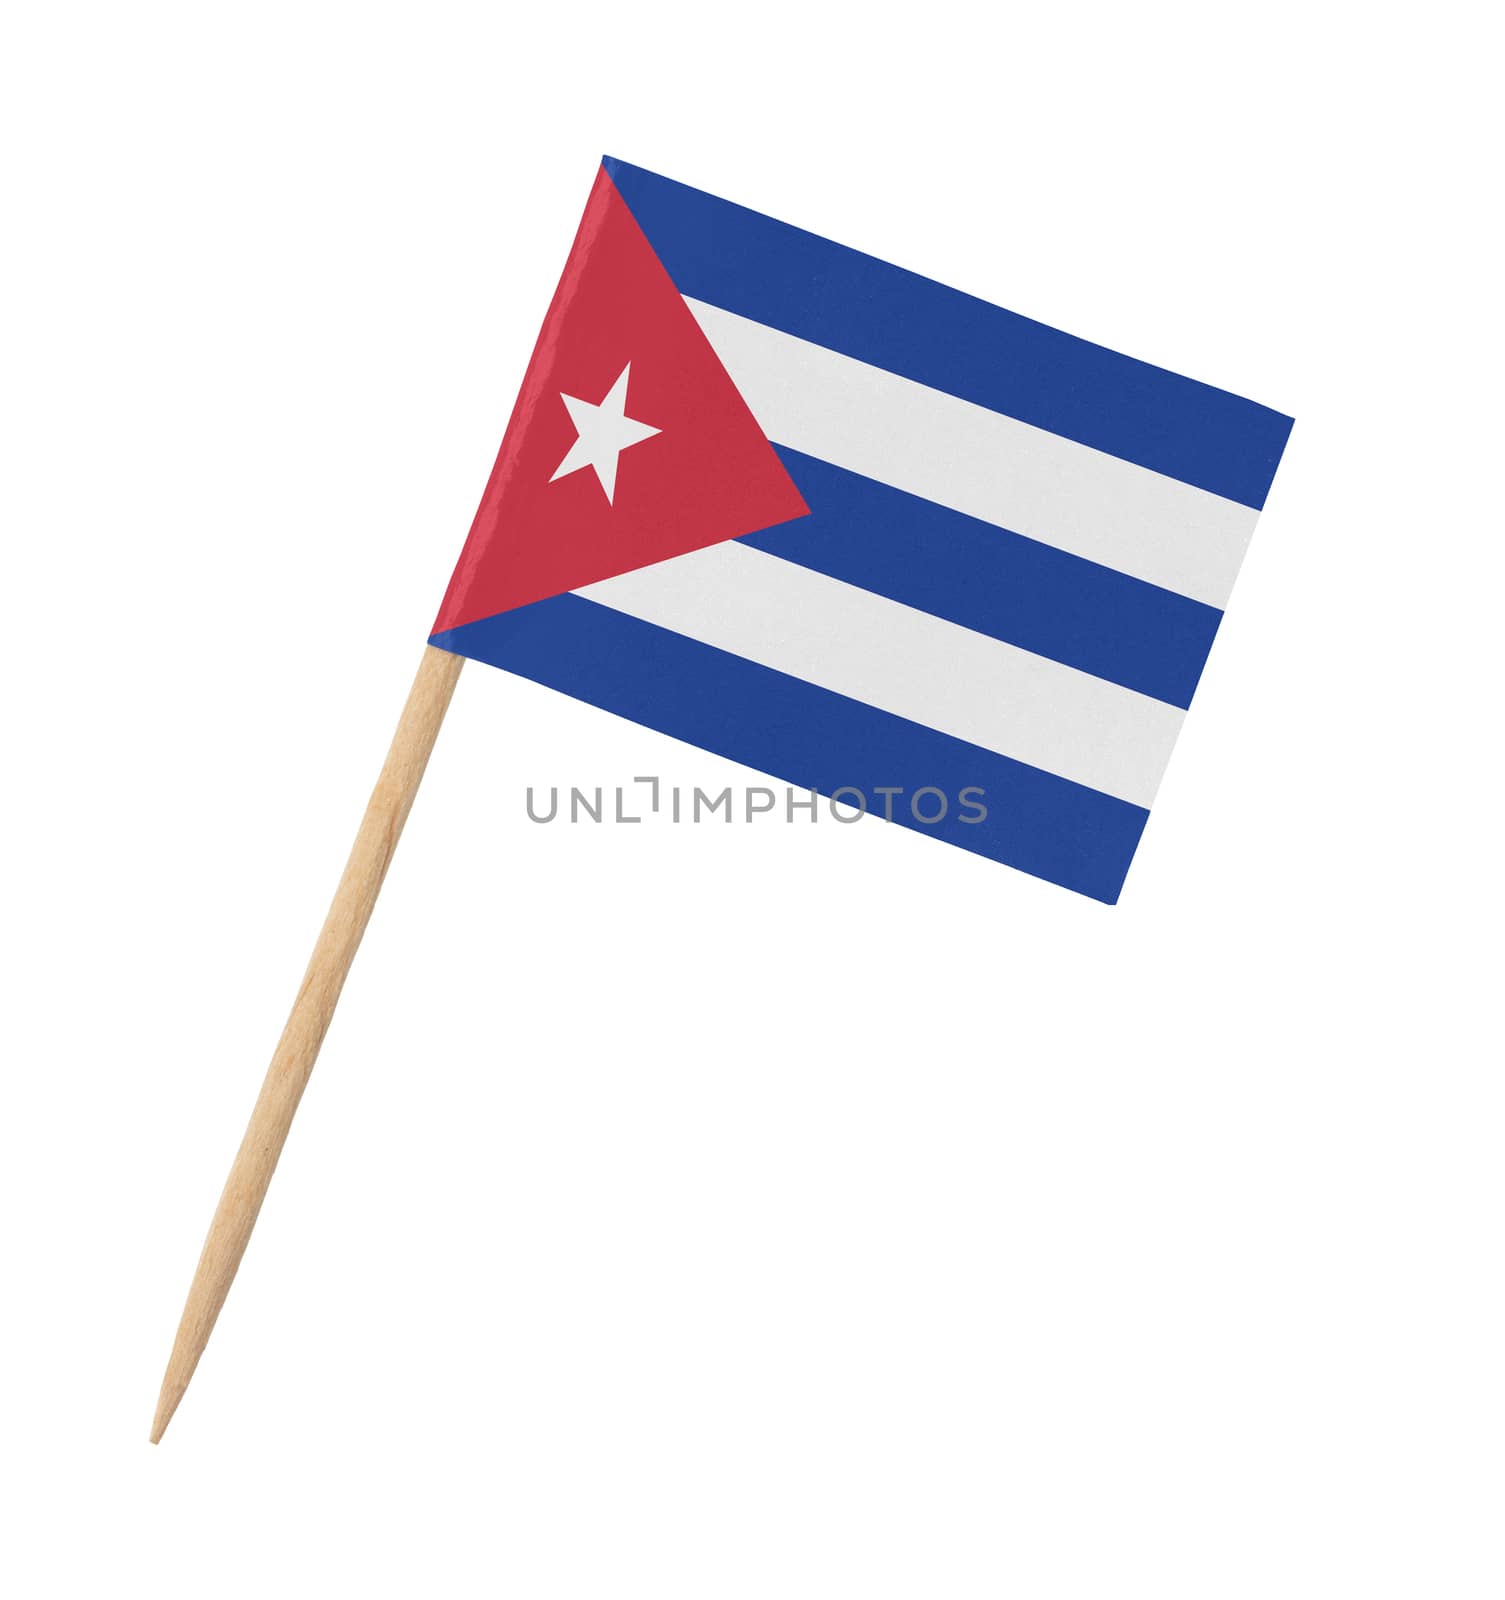 Small paper Cuban flag on wooden stick by michaklootwijk